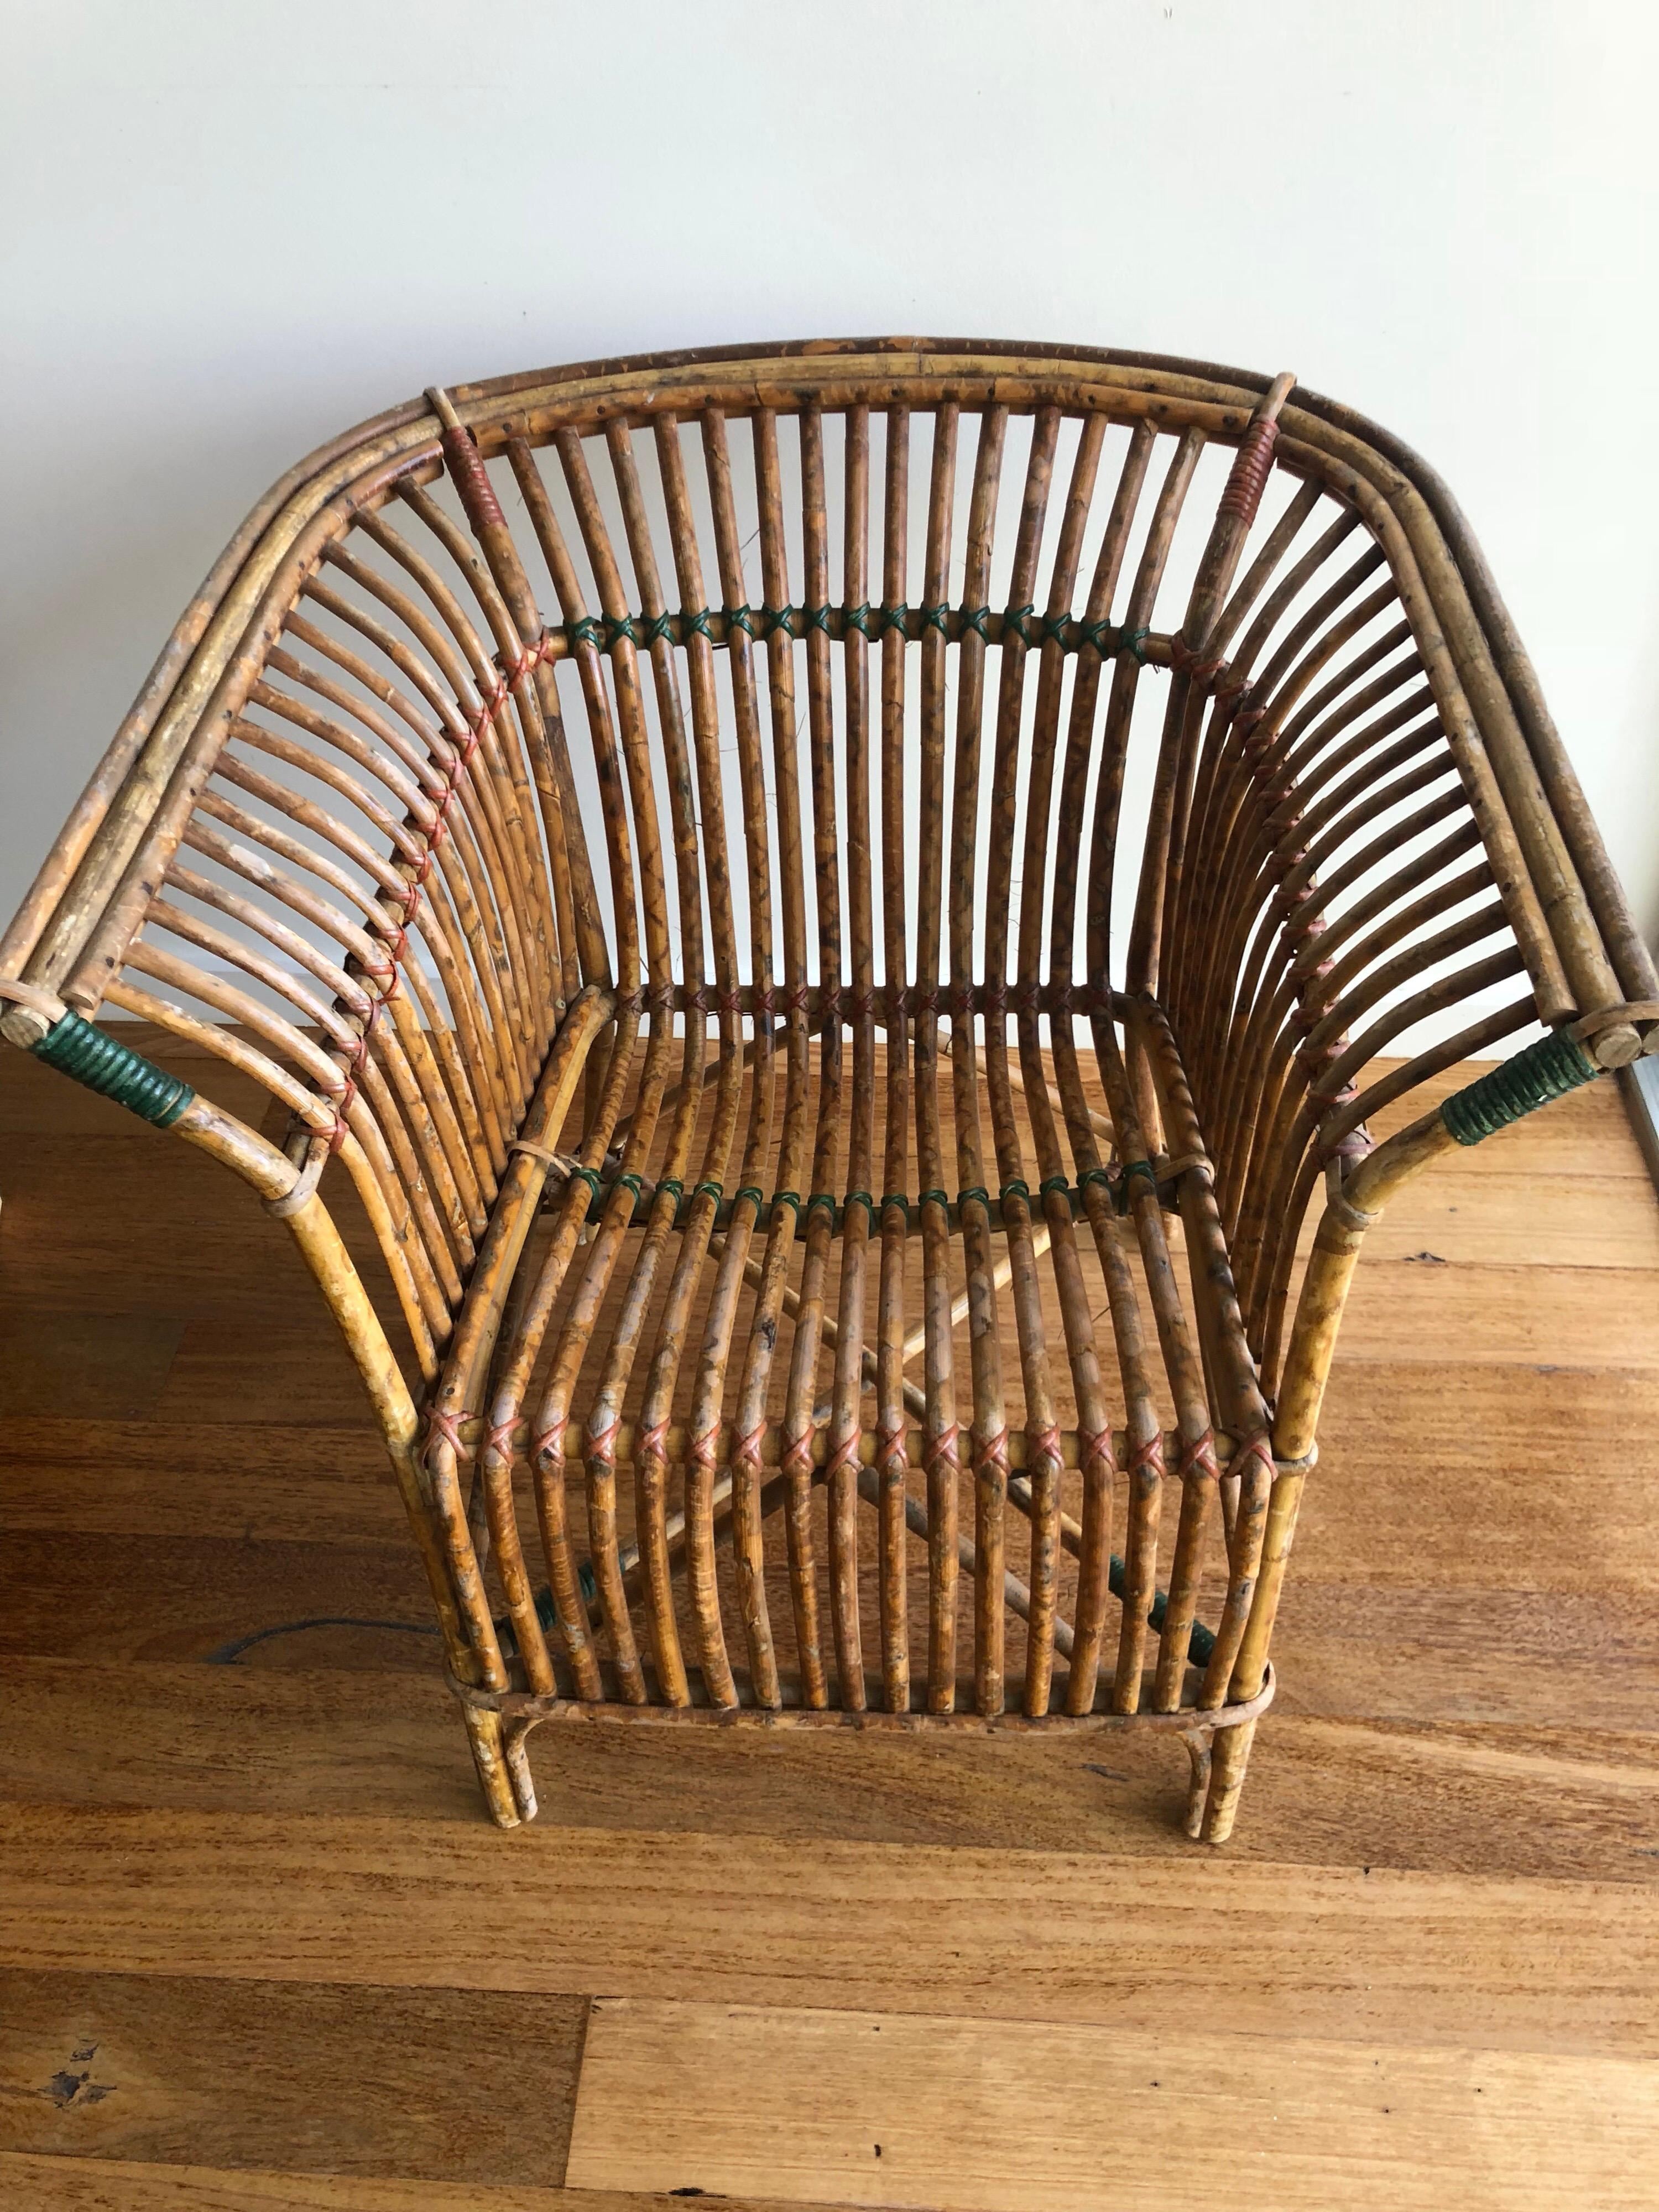 Early 20th Century Antique Split Tiger Cane Armchair with Organic Fan Form Lines For Sale